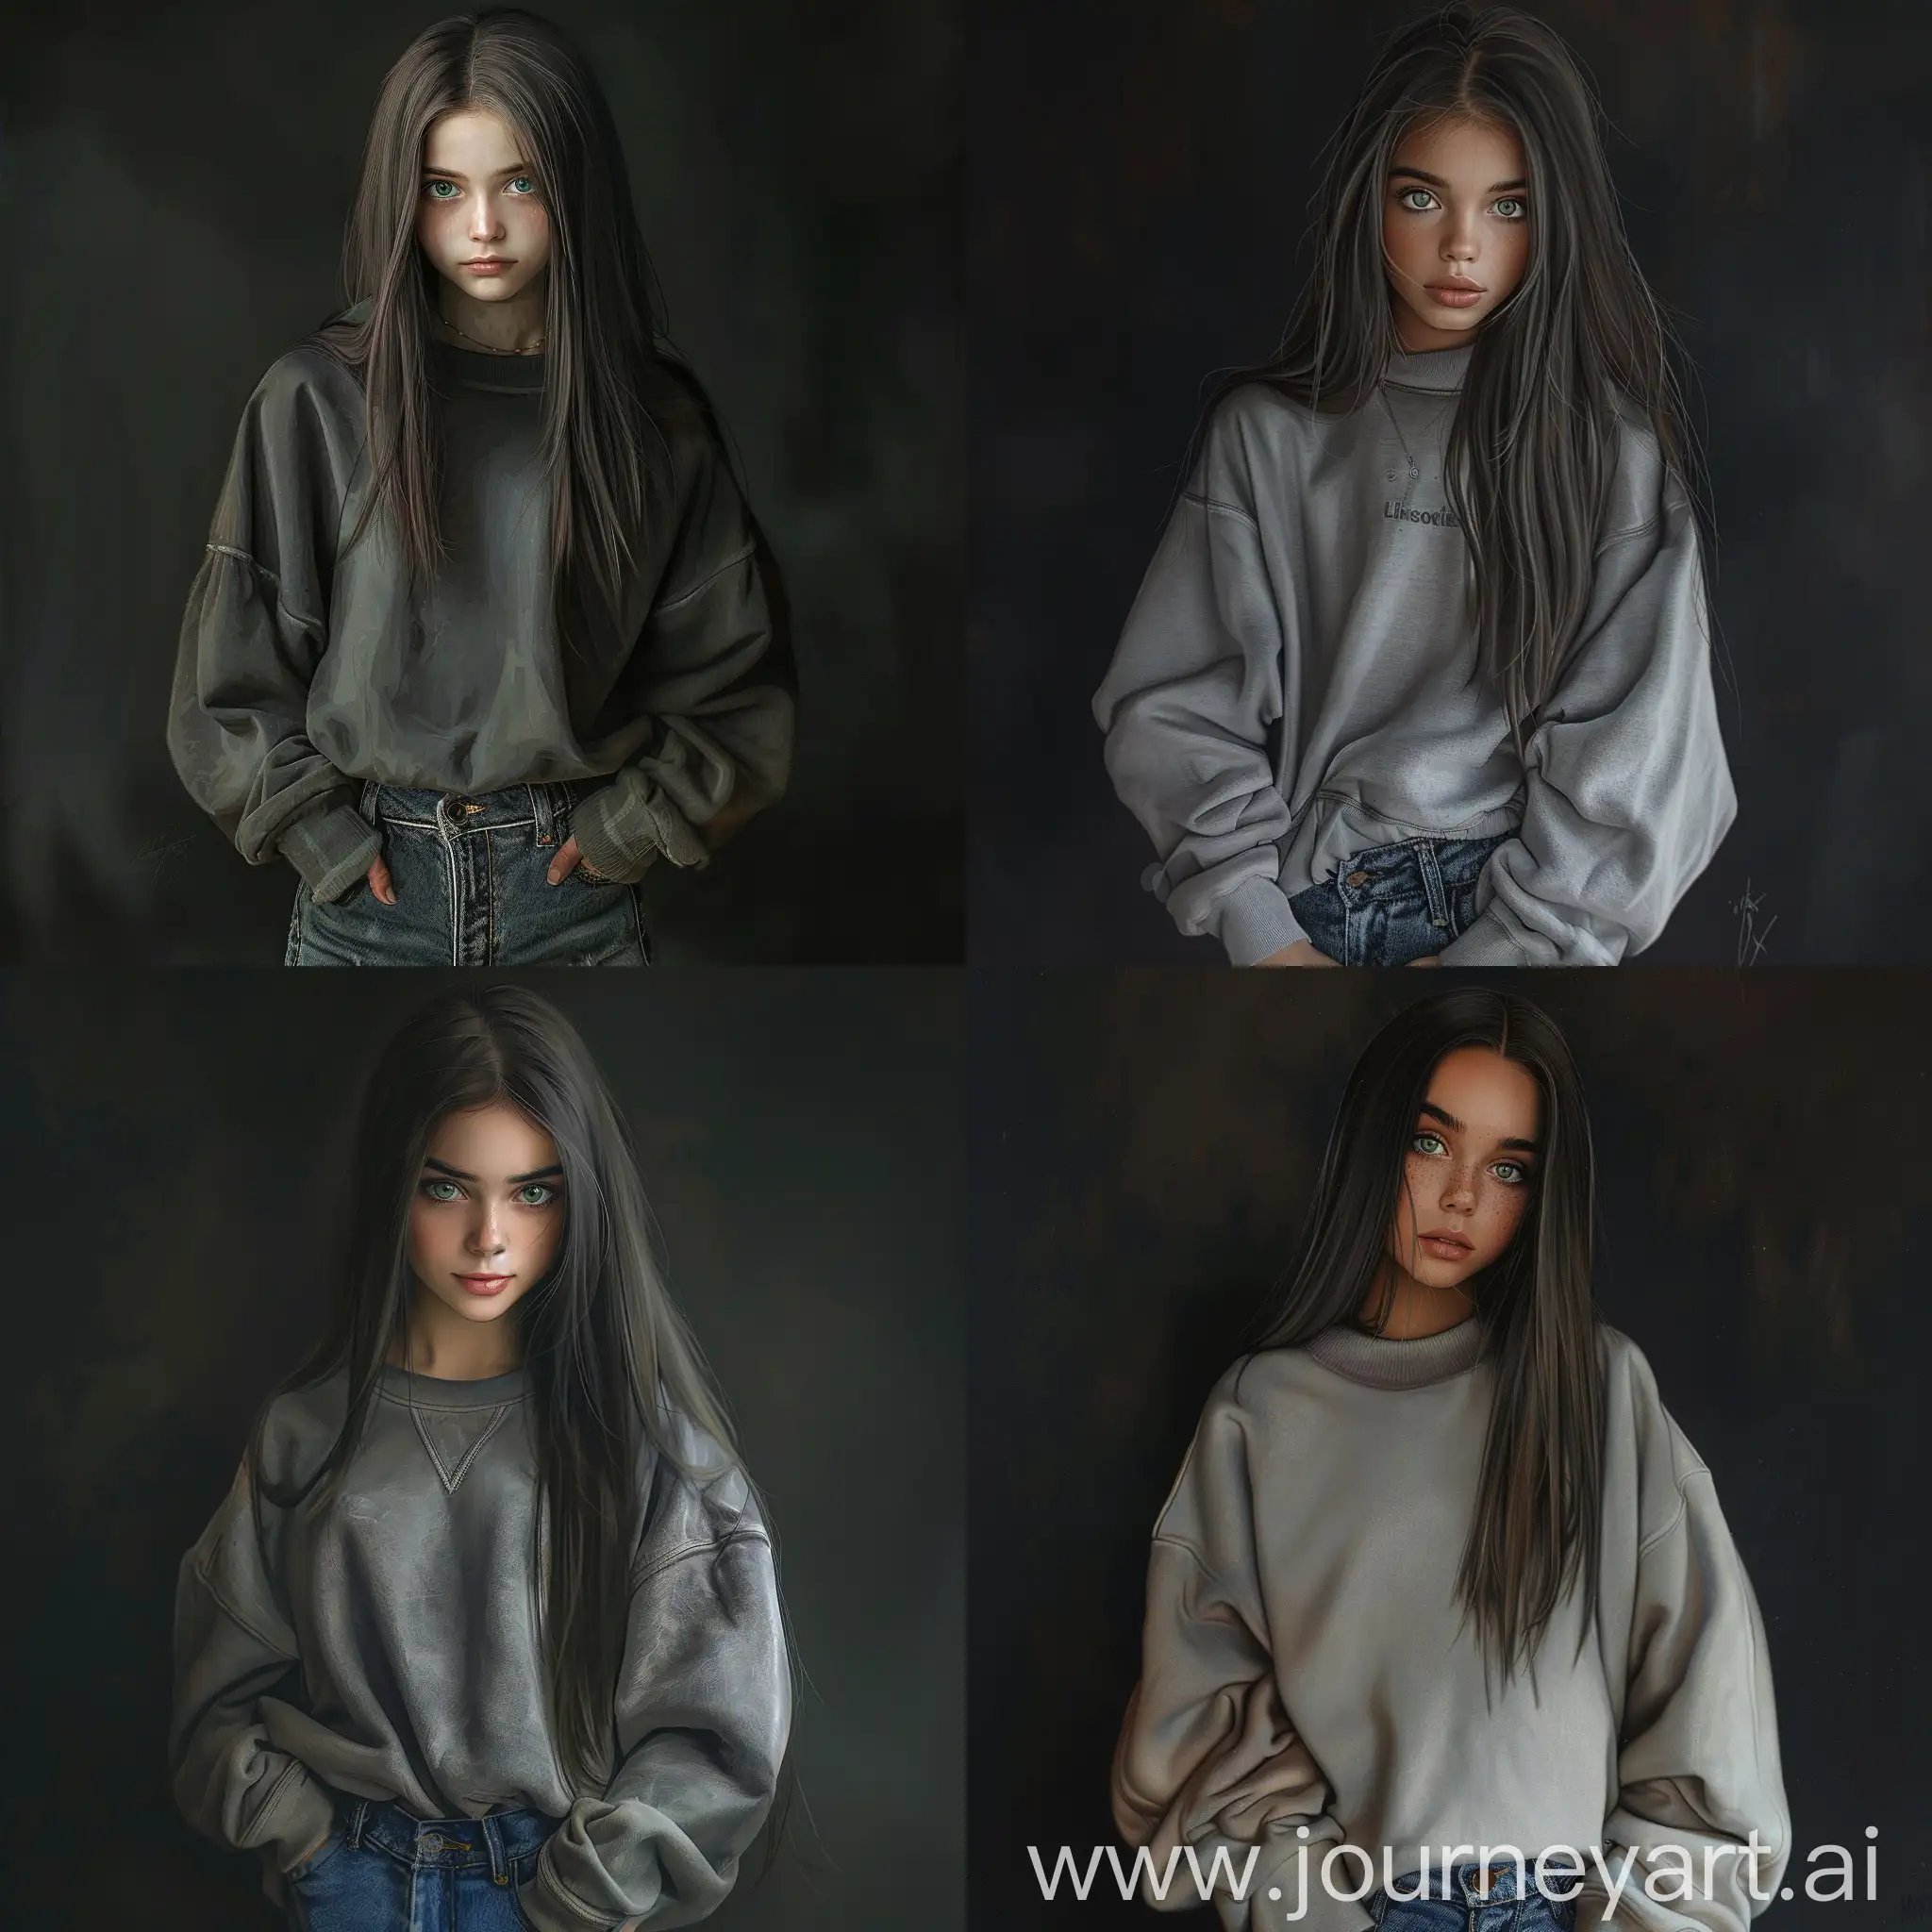 Chic-Teenager-in-Casual-Style-Stylish-15YearOld-Girl-with-Dark-Brown-Hair-and-Oversized-Sweatshirt